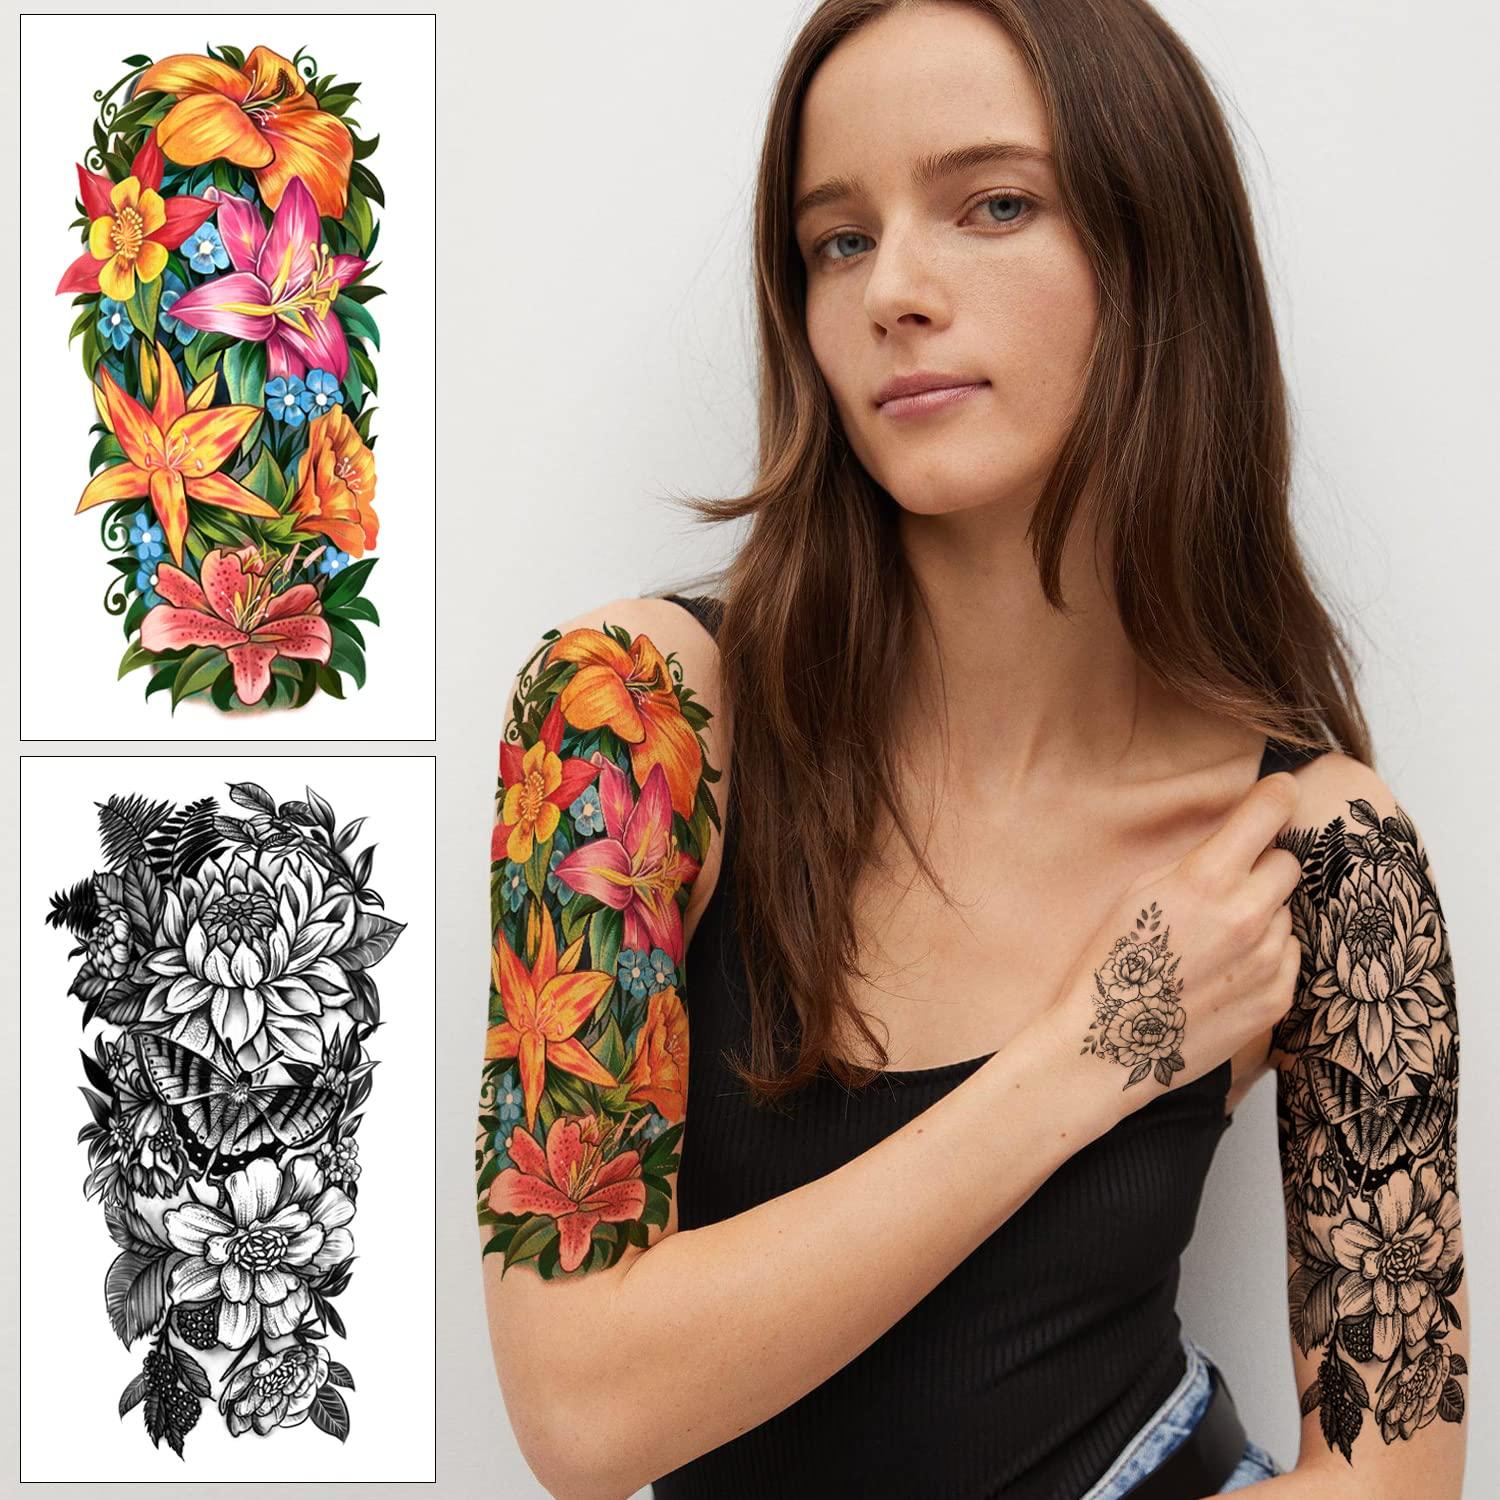 SOOVSY 46 Sheets Full Arm Temporary Tattoos For Women Adults, 3D